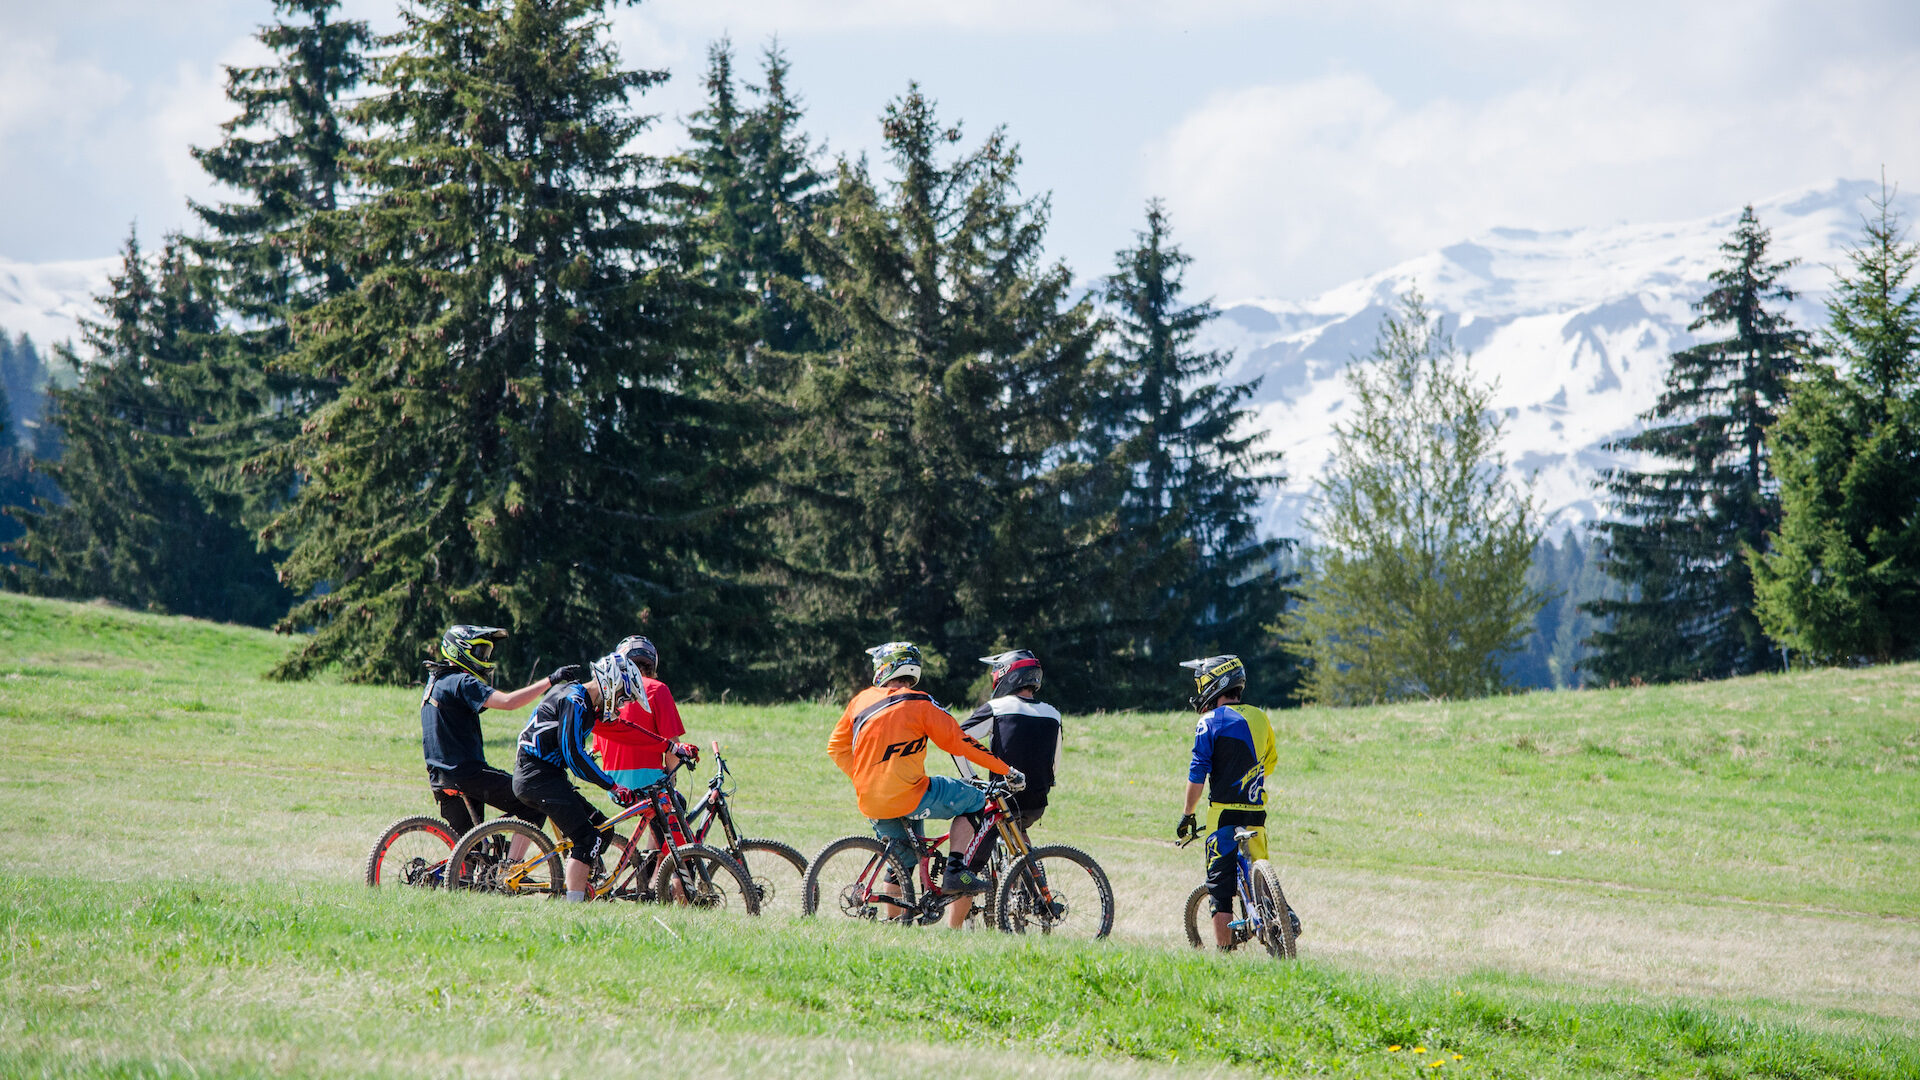 Group of friends on mountain bikes in summer